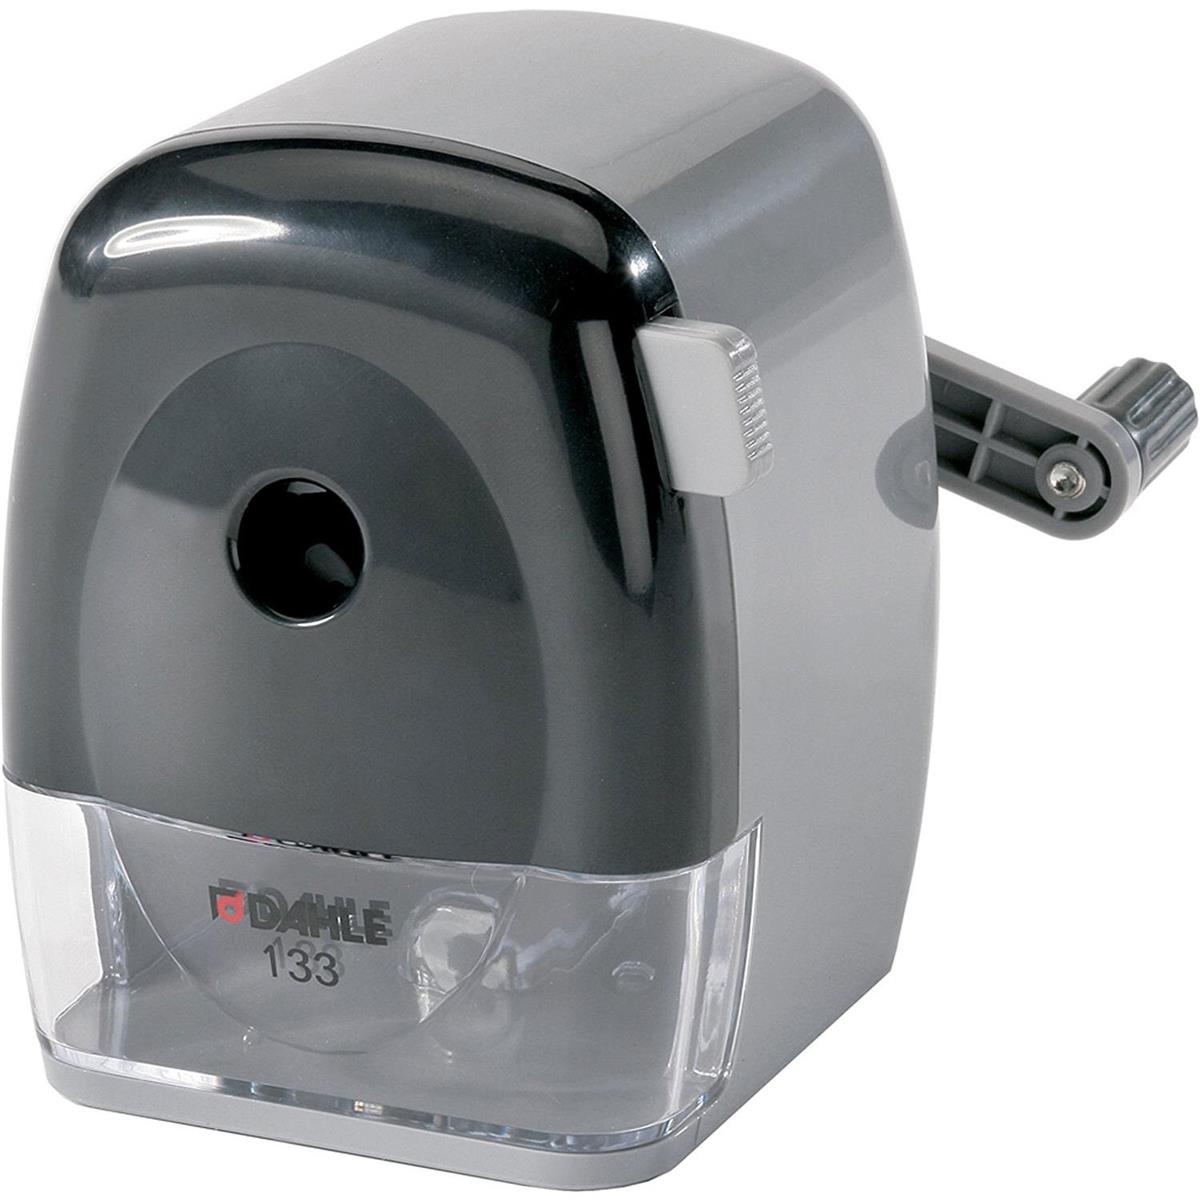 Image of Dahle Personal Rotary Pencil Sharpener